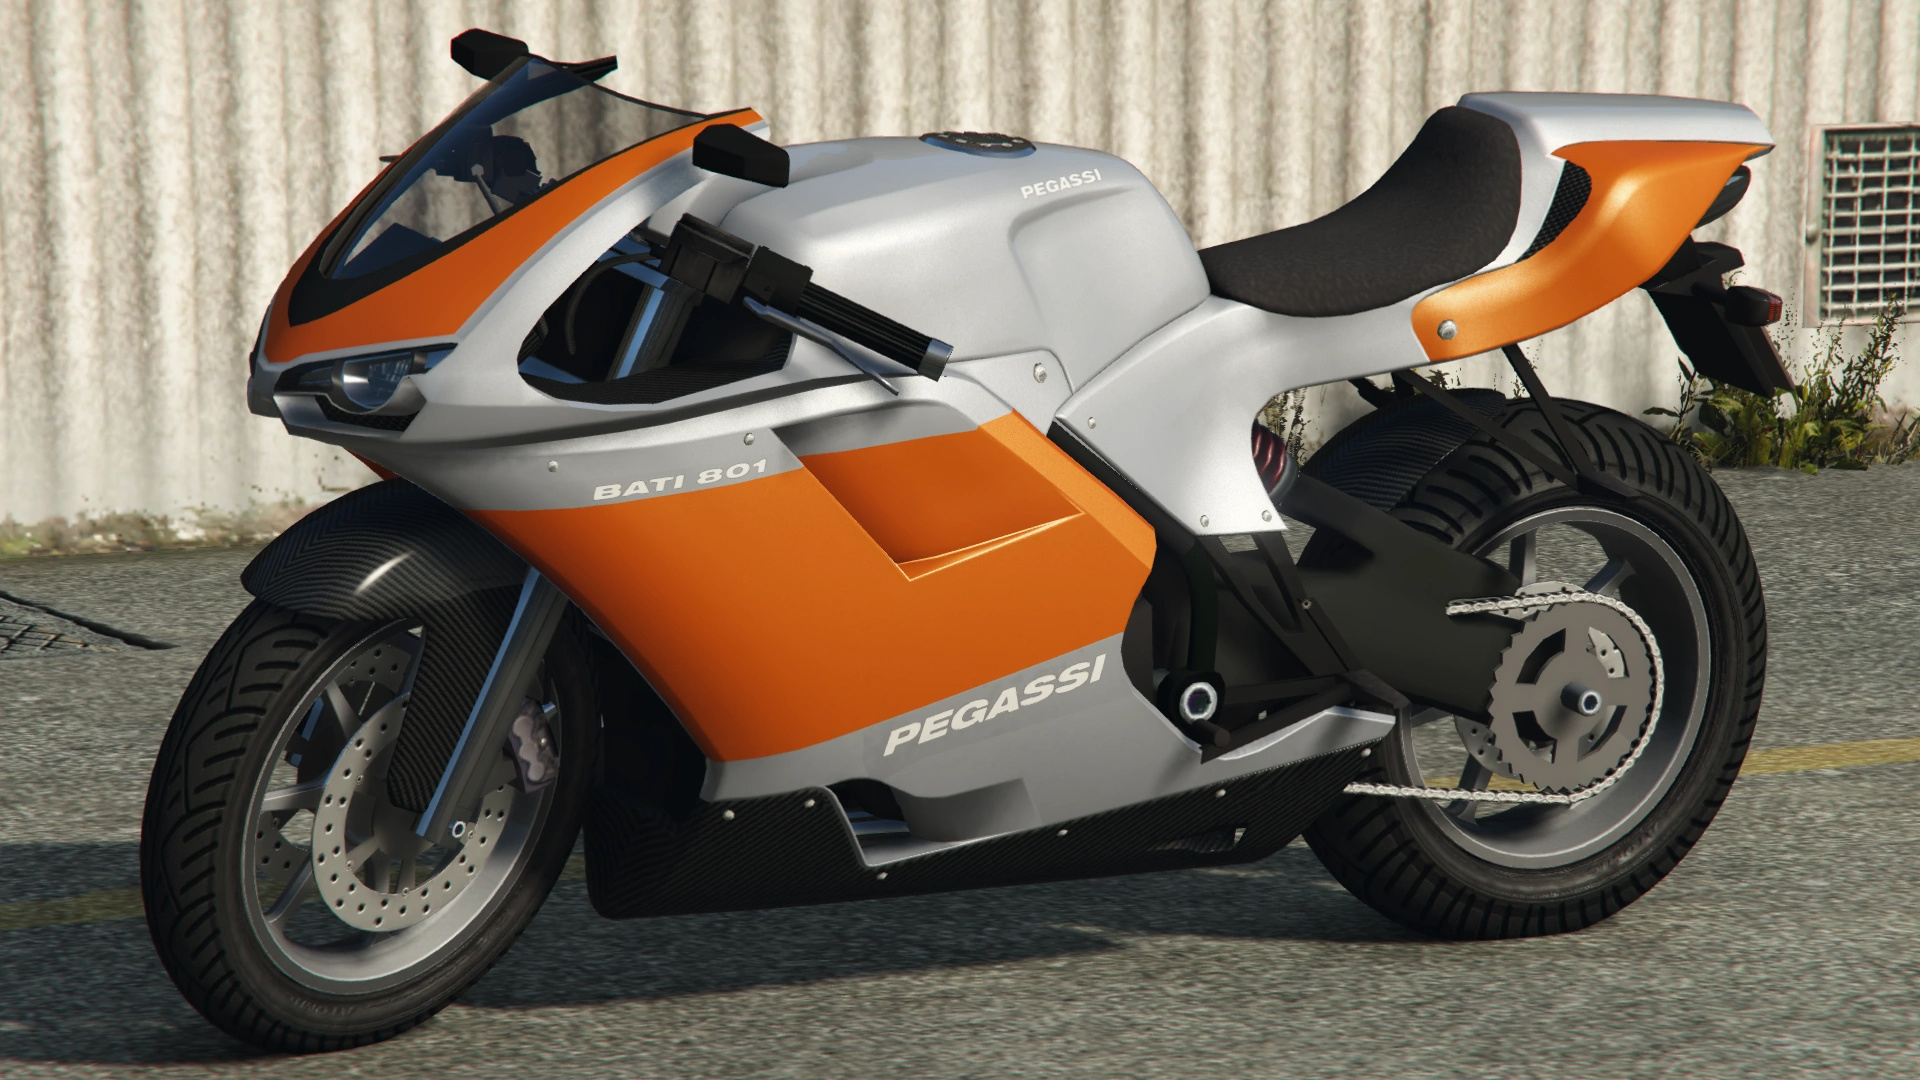 The Best Bikes And Motorcycles To Buy In GTA Online